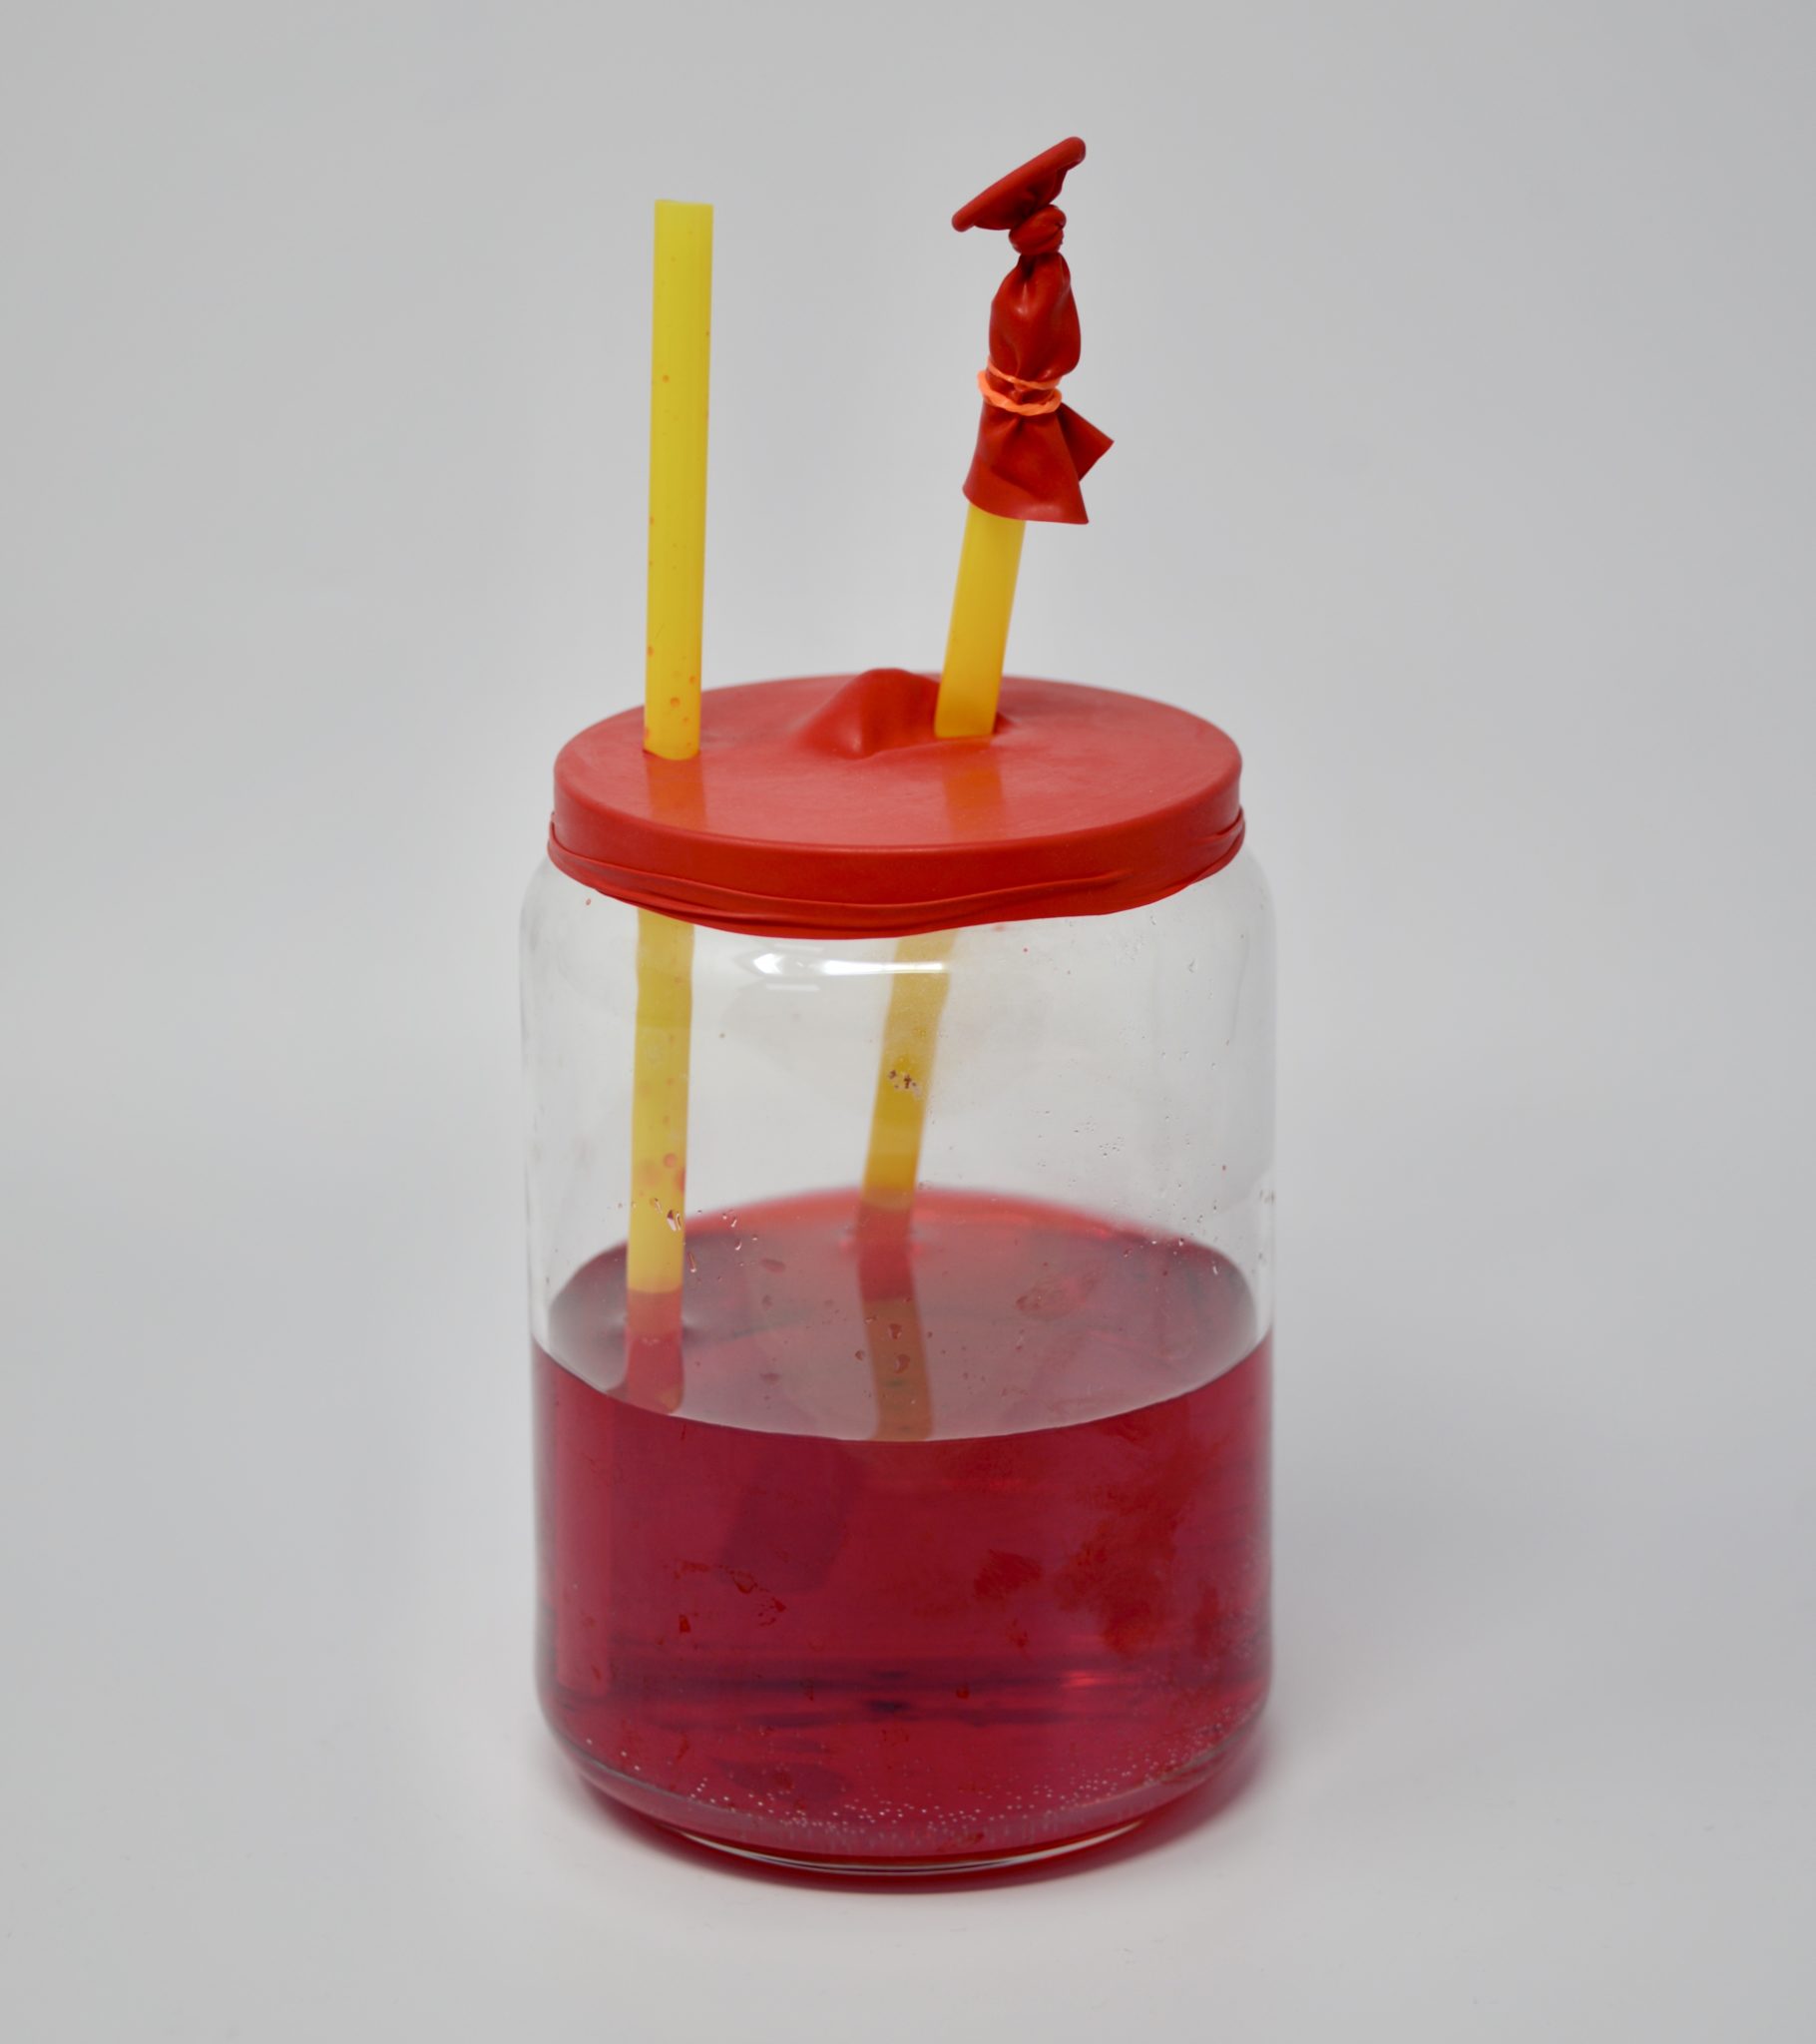 pumping heart model made with a jar, straw and balloon